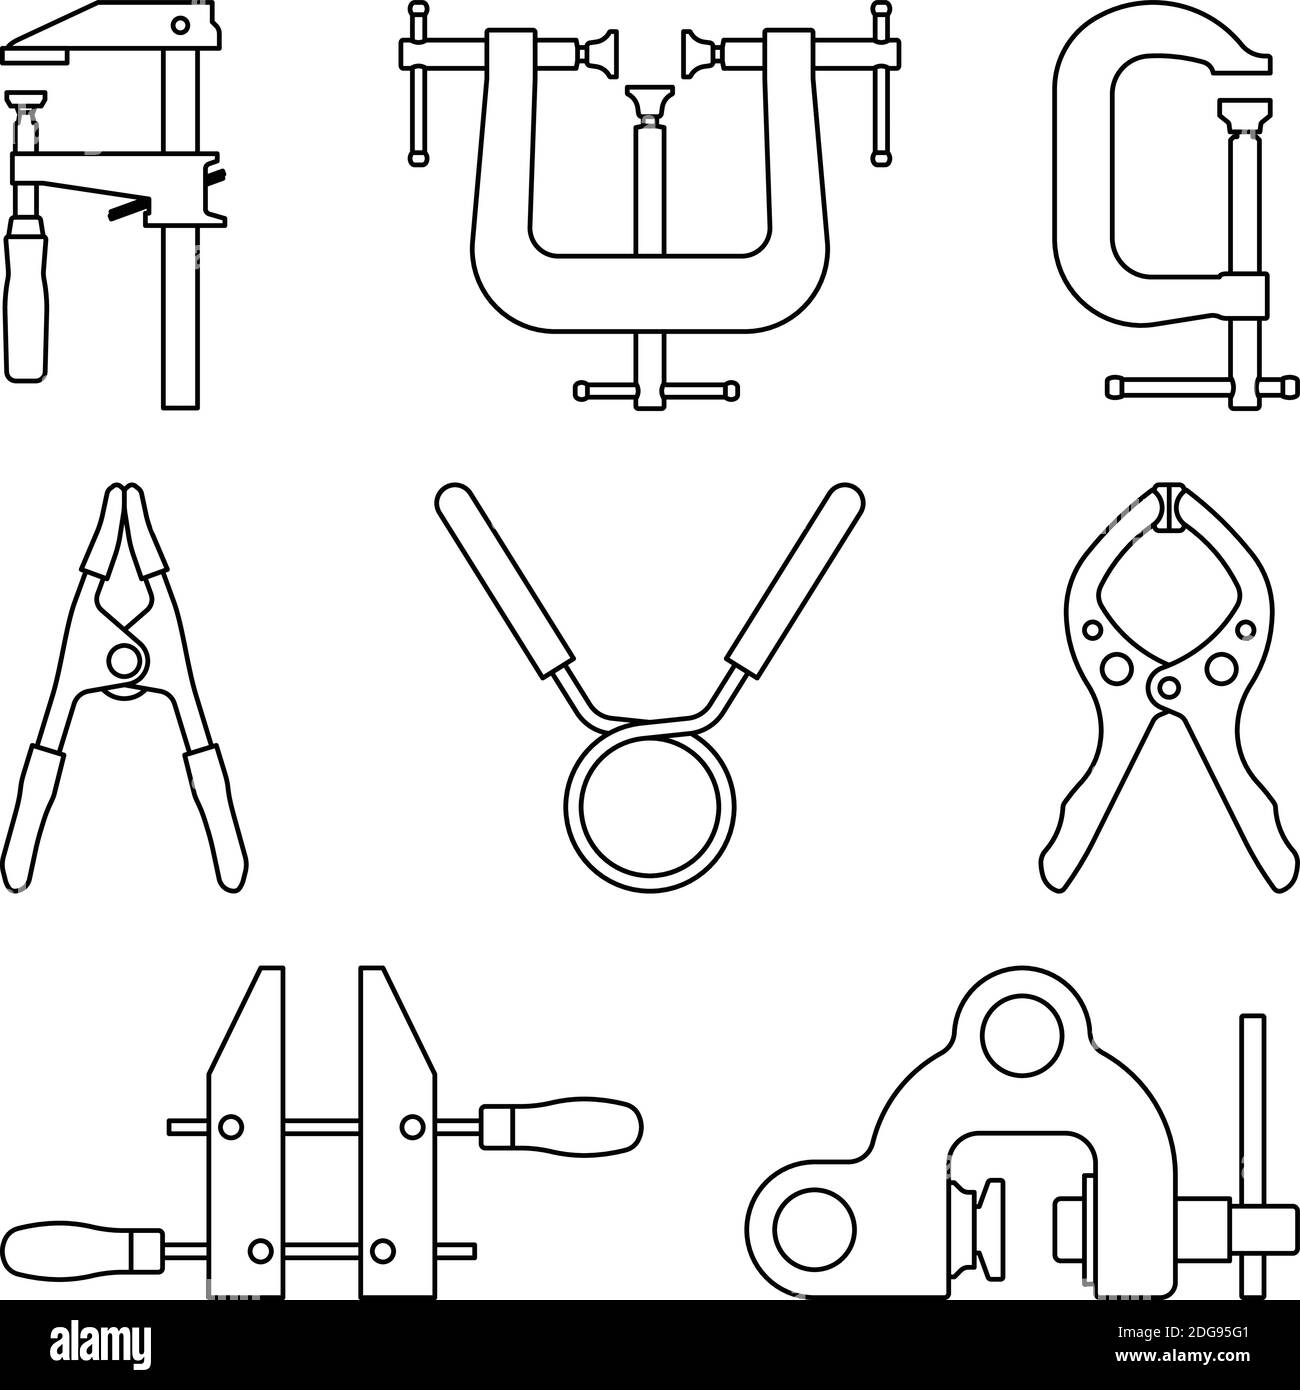 Clamp. Screw clamp. Hand tools. Thin line icons Stock Vector